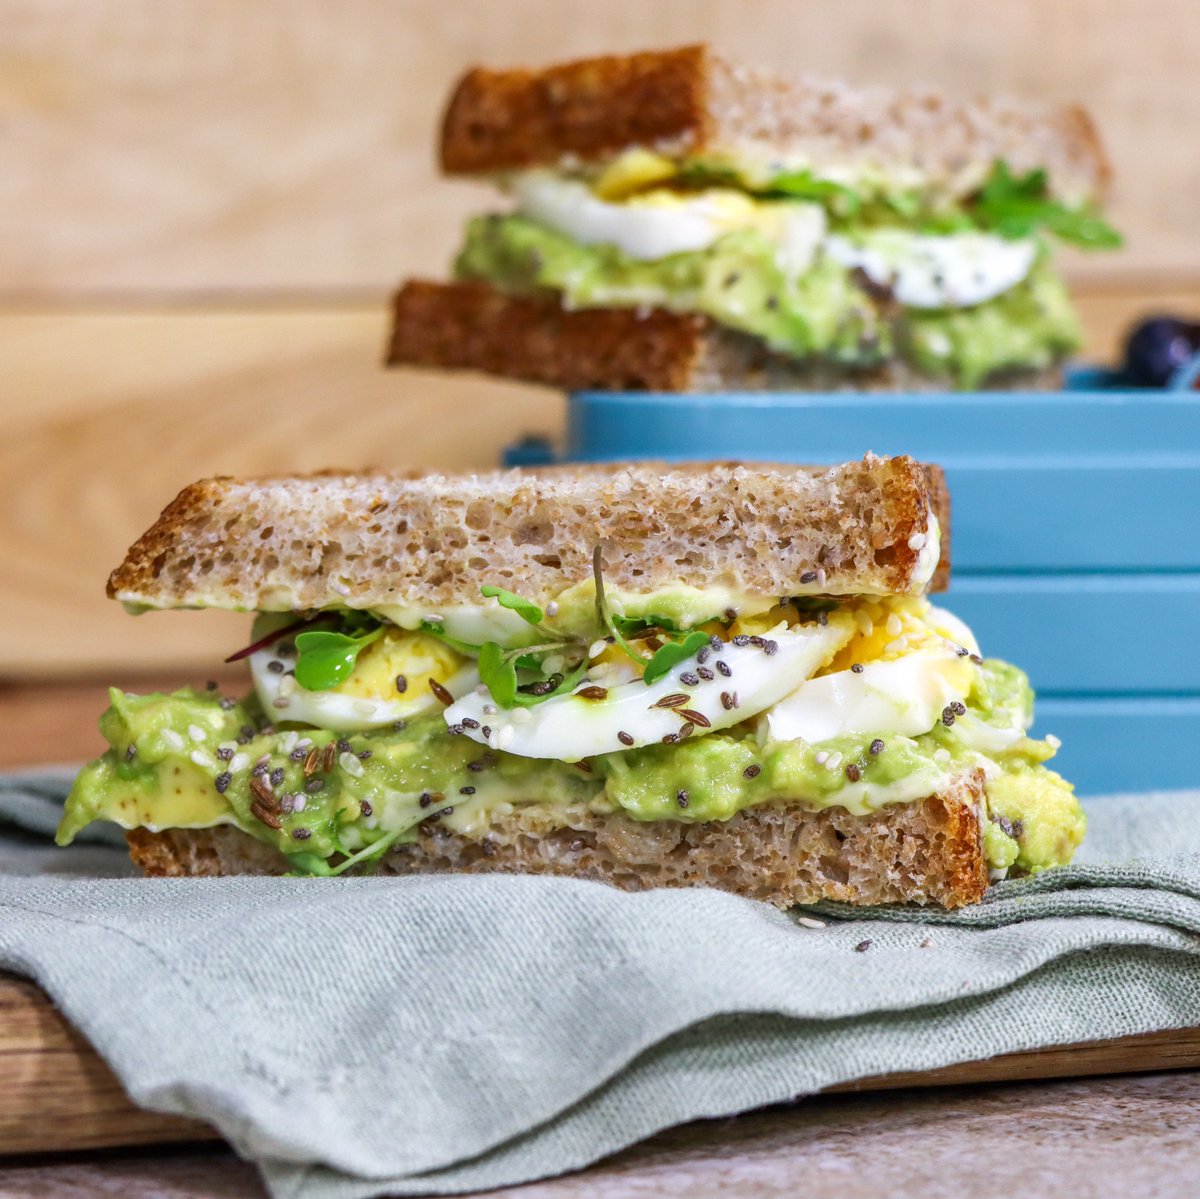 Looking for a quick, protein-packed lunch idea? Try our delicious Smashed Avo and Egg Sandwich! 🥑🥪

Our secret? Use @CloverWayBetter’s Butter Spread which is so tasty, soft and easy to spread 👌  

Elevate your sandwich game here: bit.ly/3WjZwJ4 #AfternoonExpress